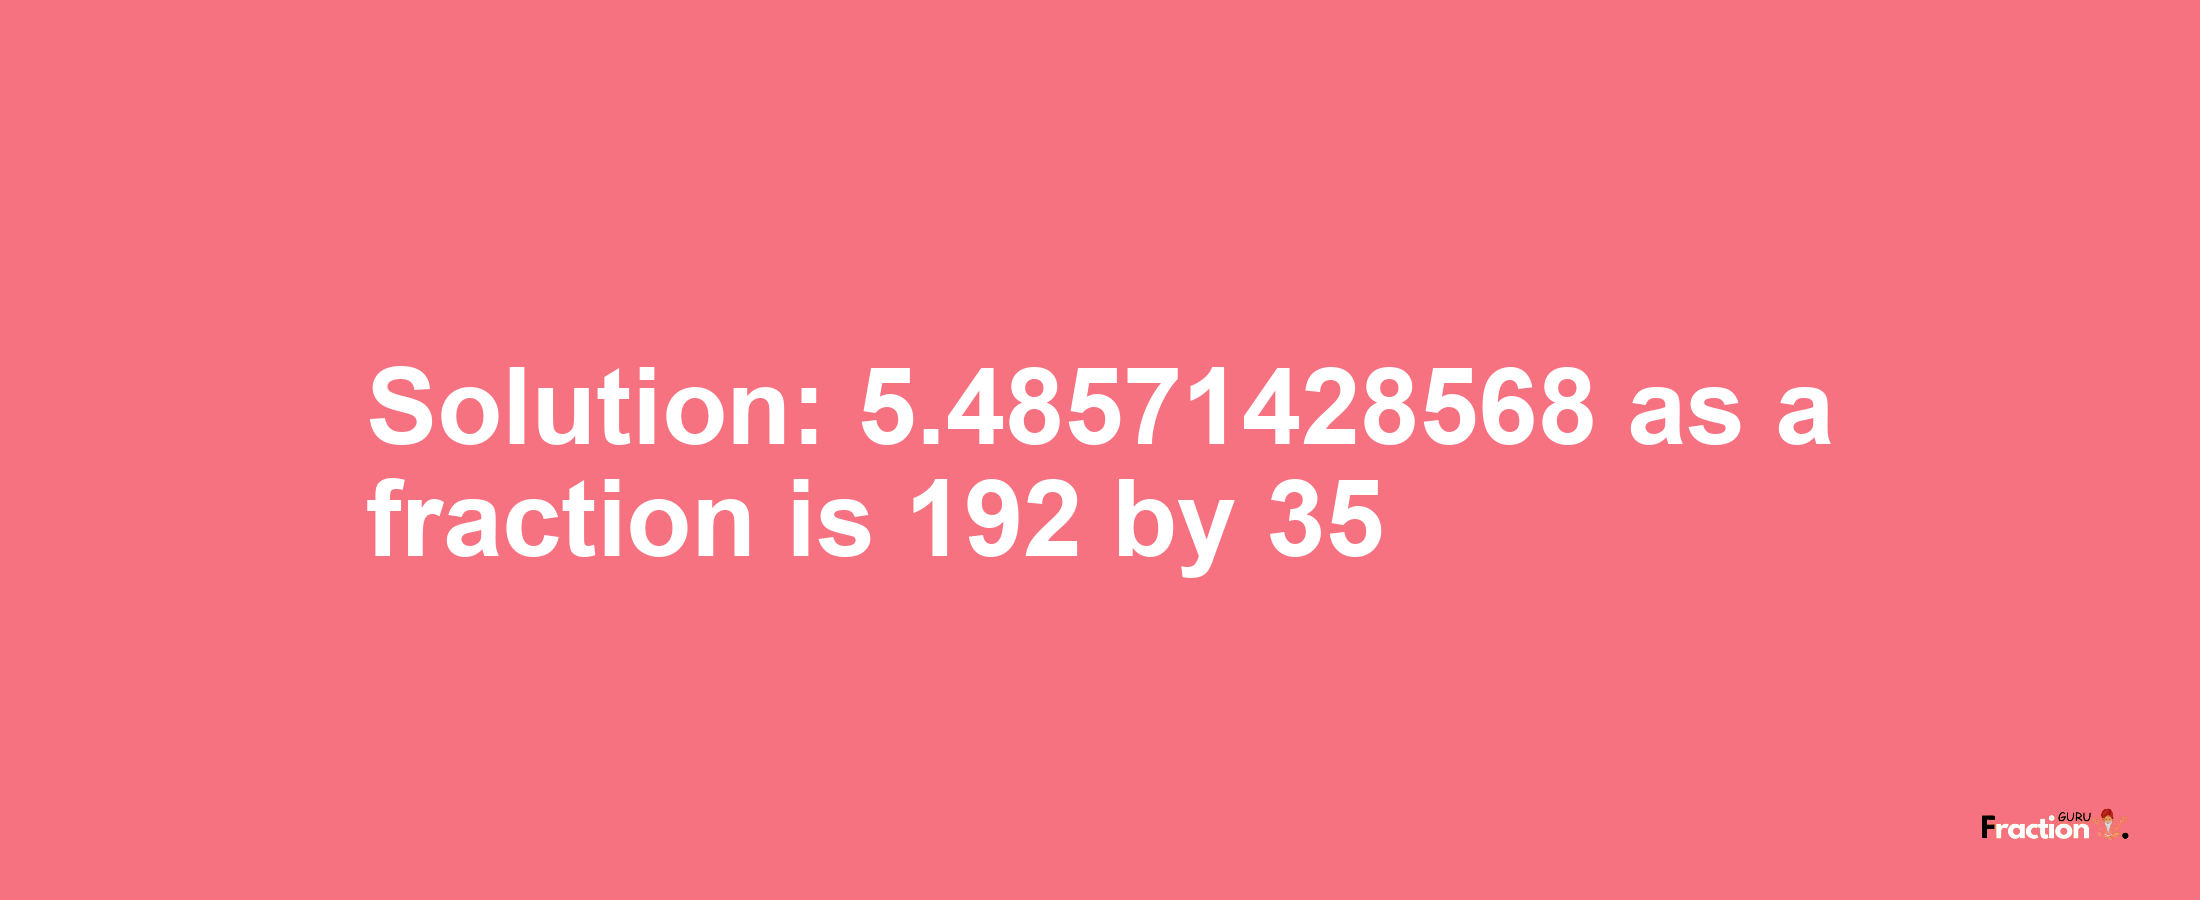 Solution:5.48571428568 as a fraction is 192/35